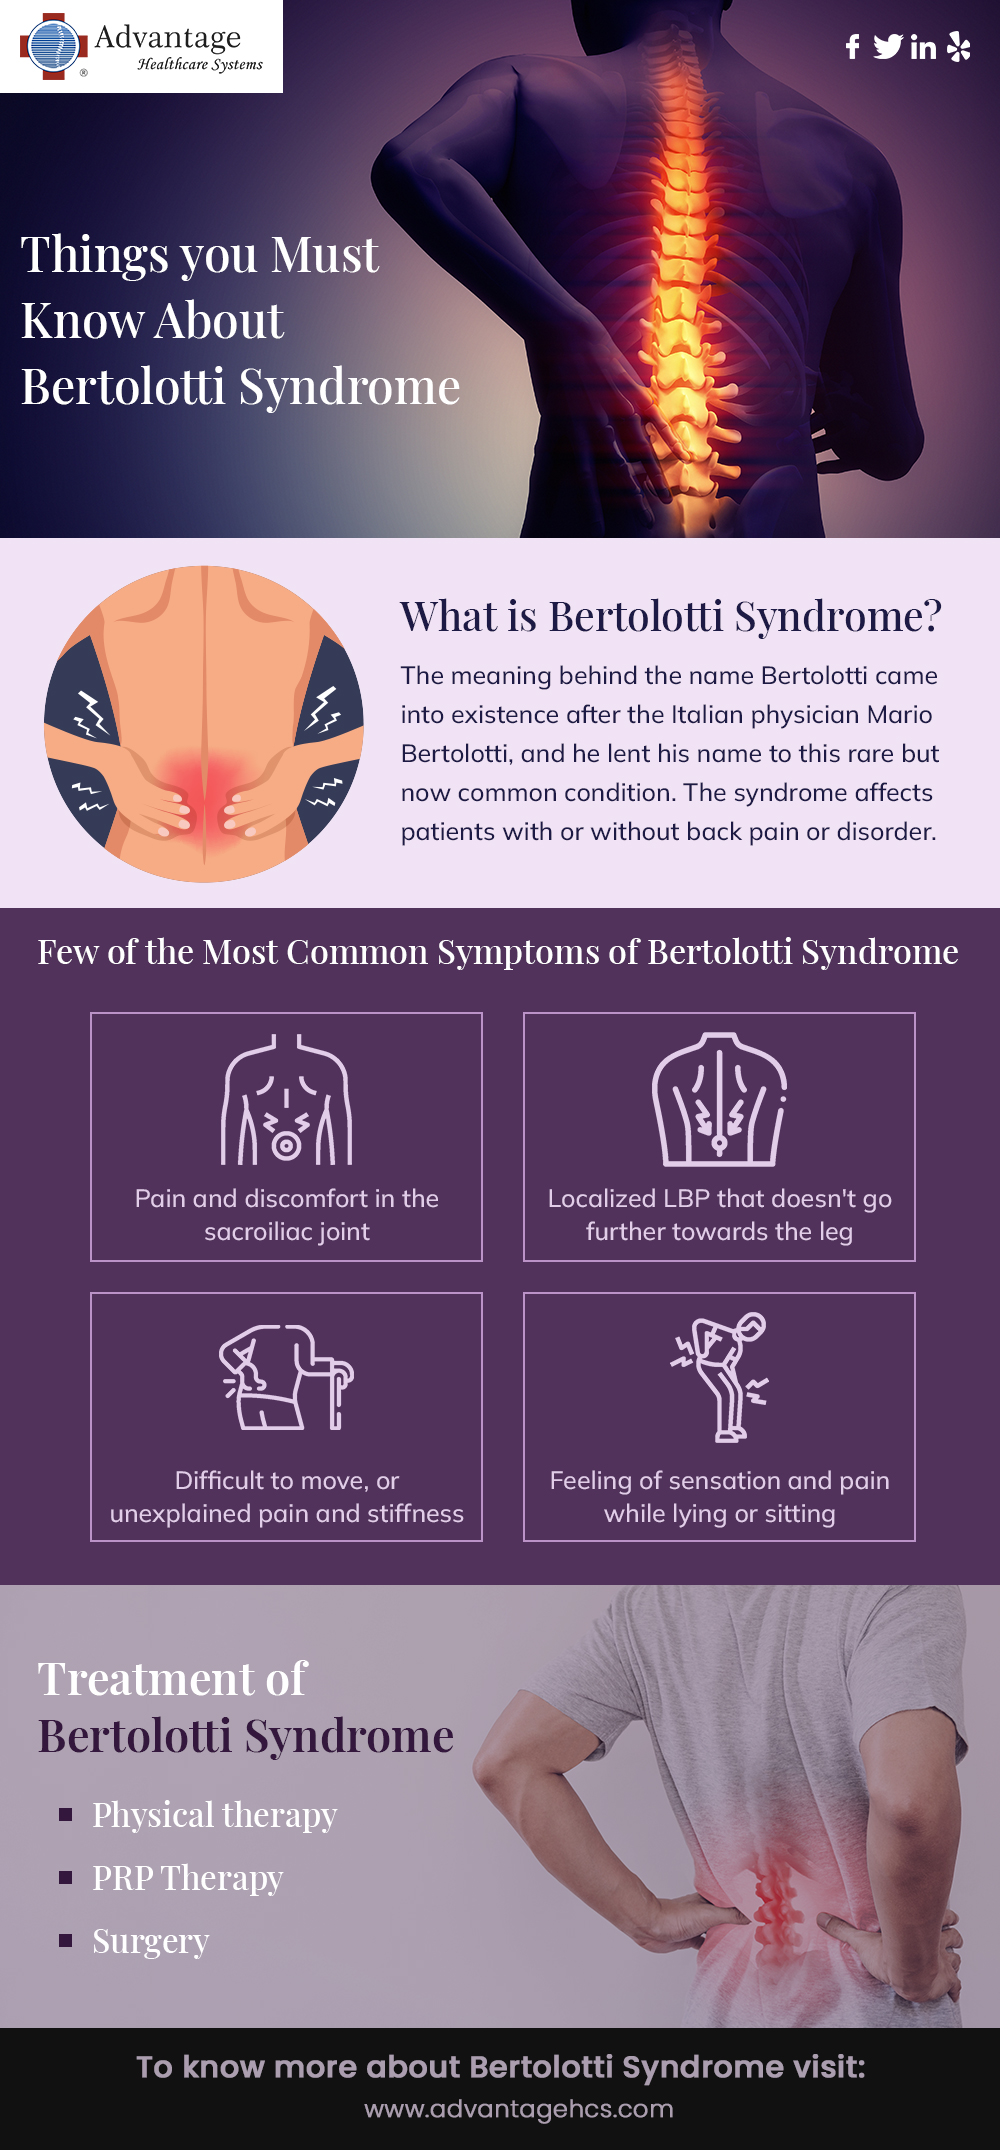 Things you Must Know About Bertolotti Syndrome